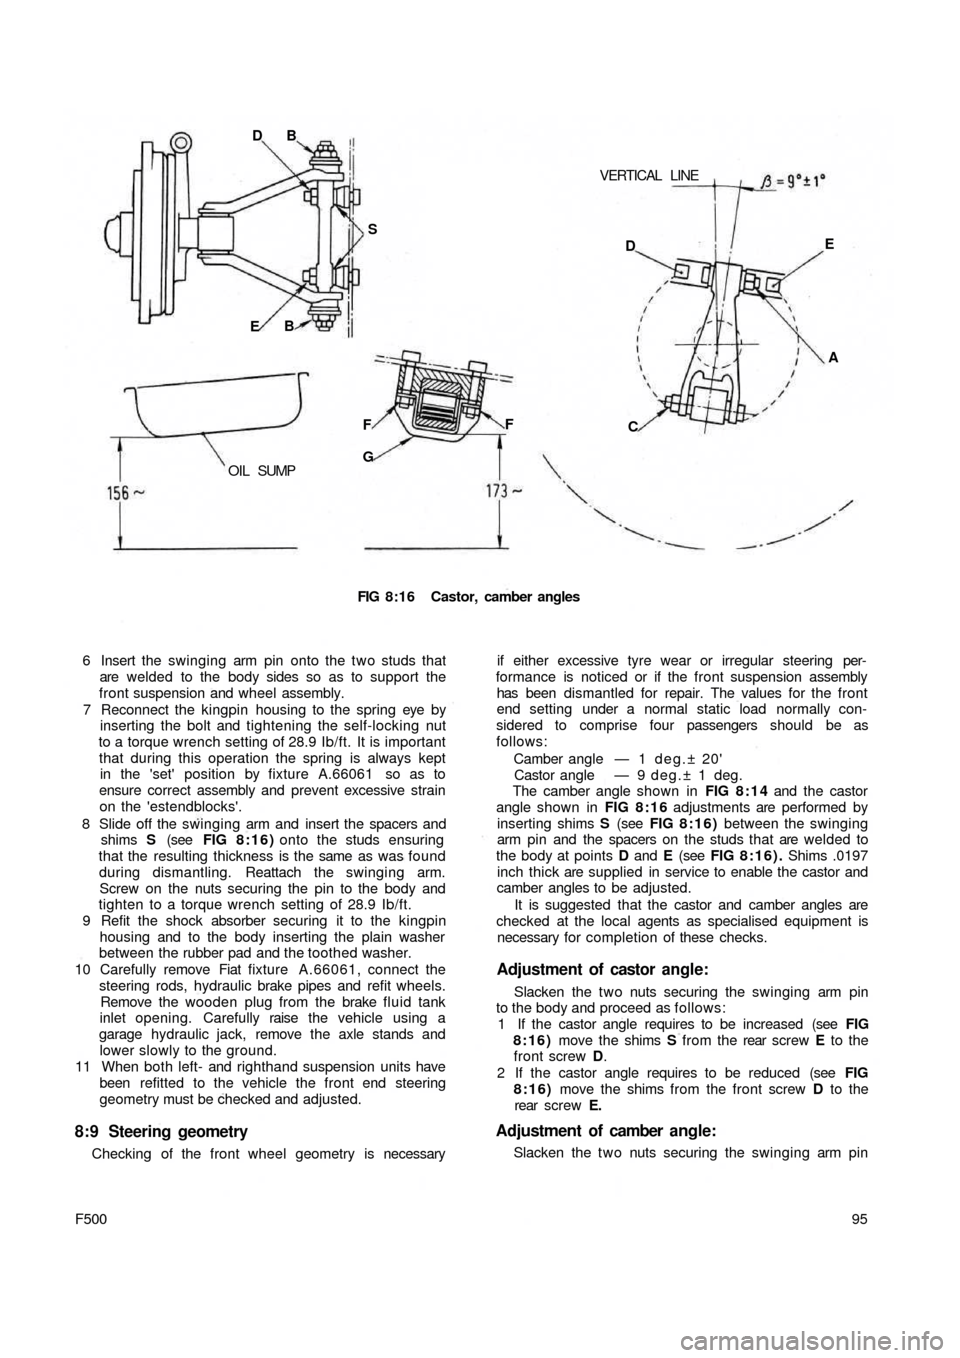 FIAT 500 1969 1.G Workshop Manual VERTICAL  LINE DB
S
EB
OIL  SUMPF
GF
FIG 8:16 Castor, camber angles
6 Insert the swinging arm pin onto the two studs that
are welded  to the  body sides so as to support the
front suspension and wheel